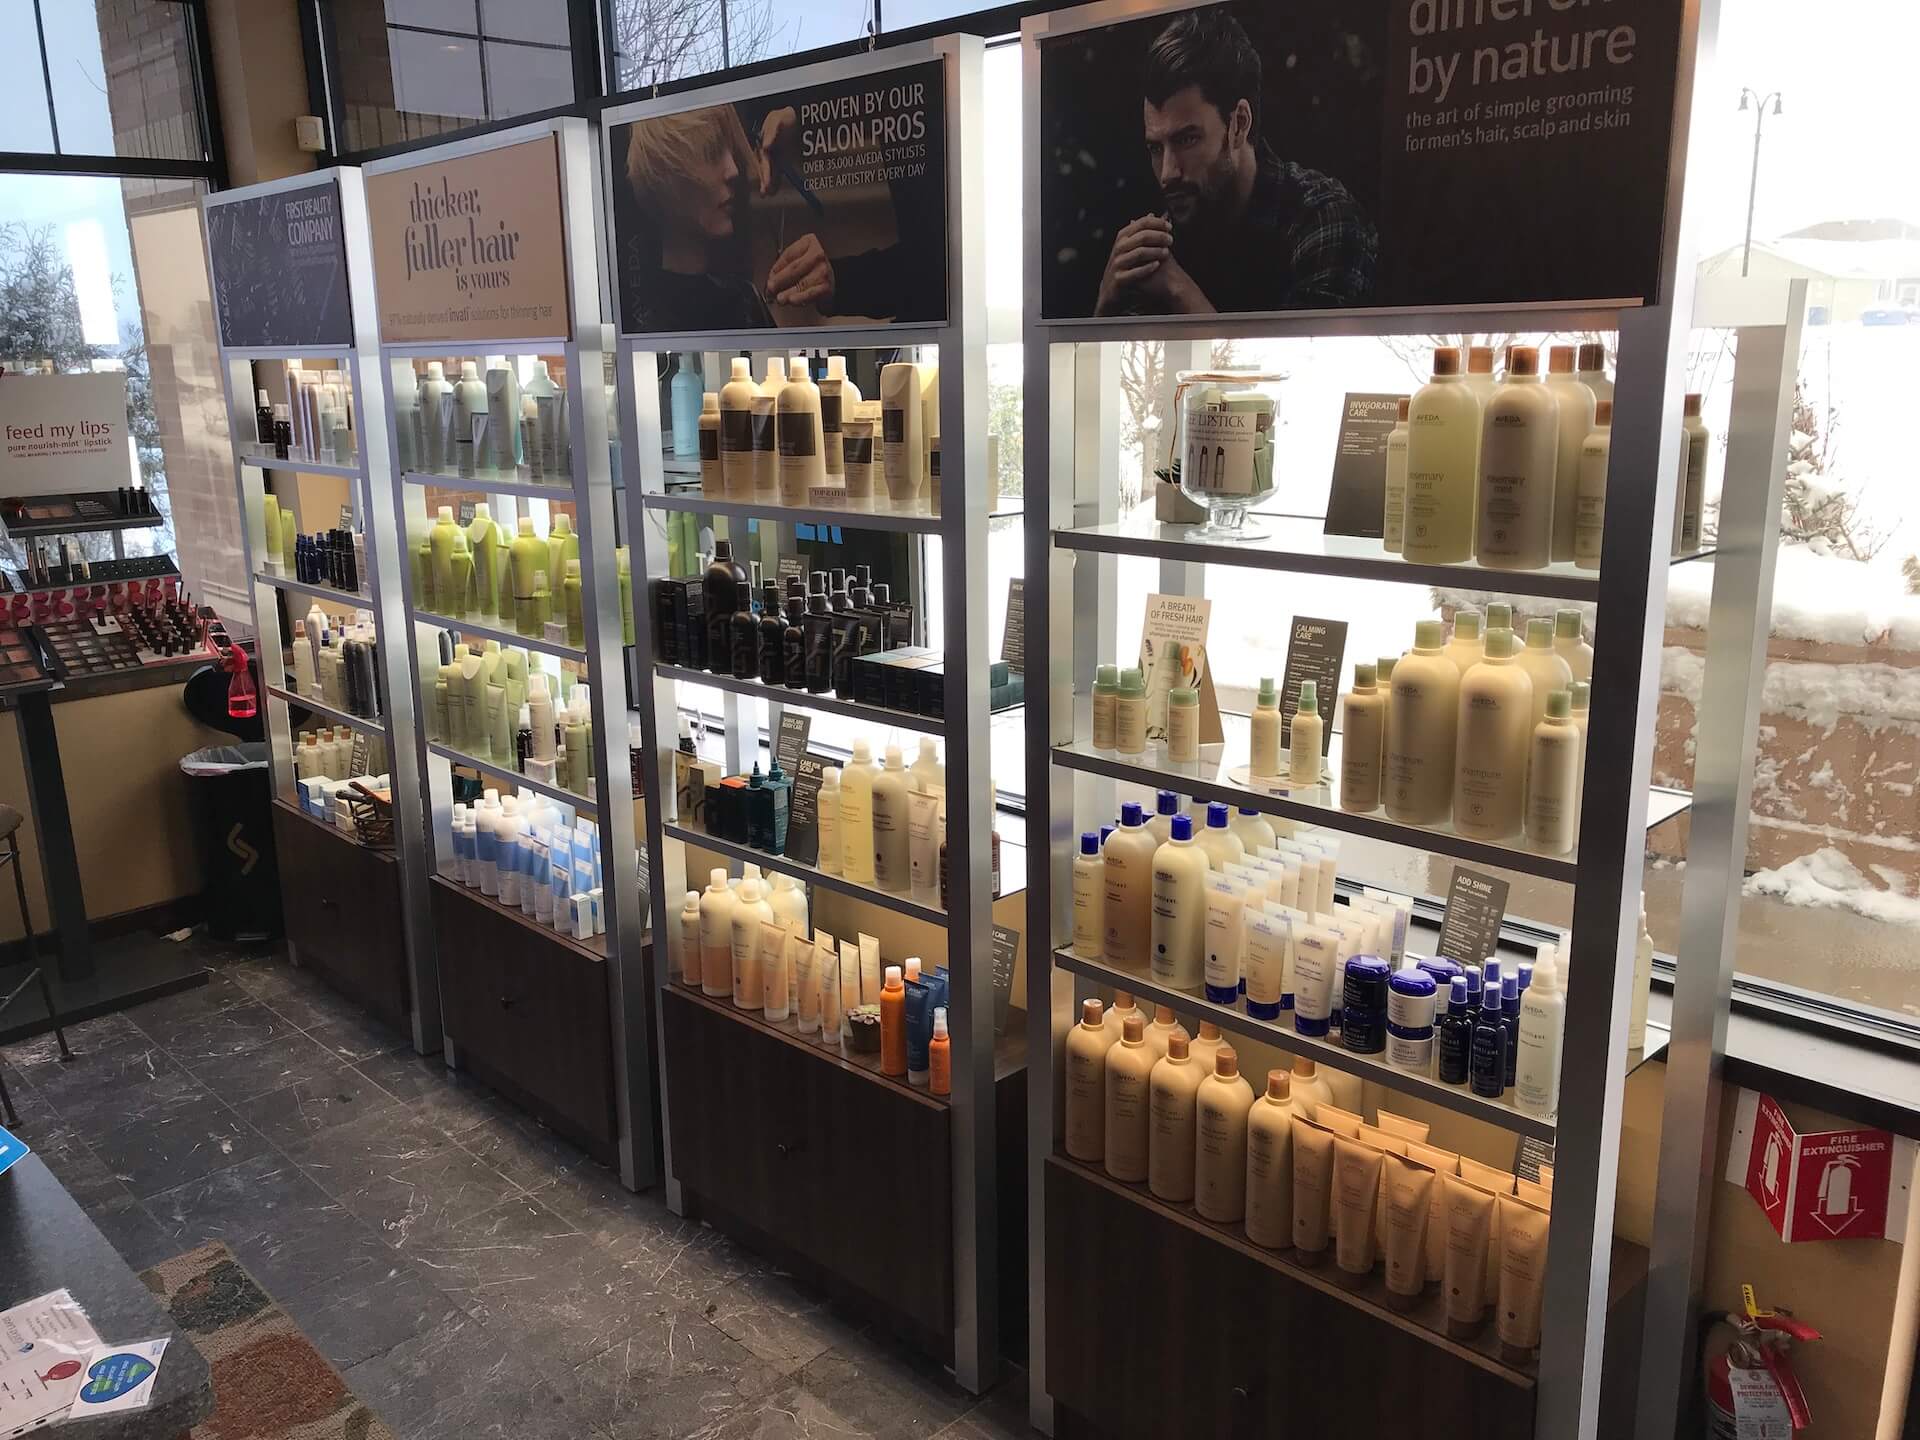 A custom retail display for hair care products in a store.